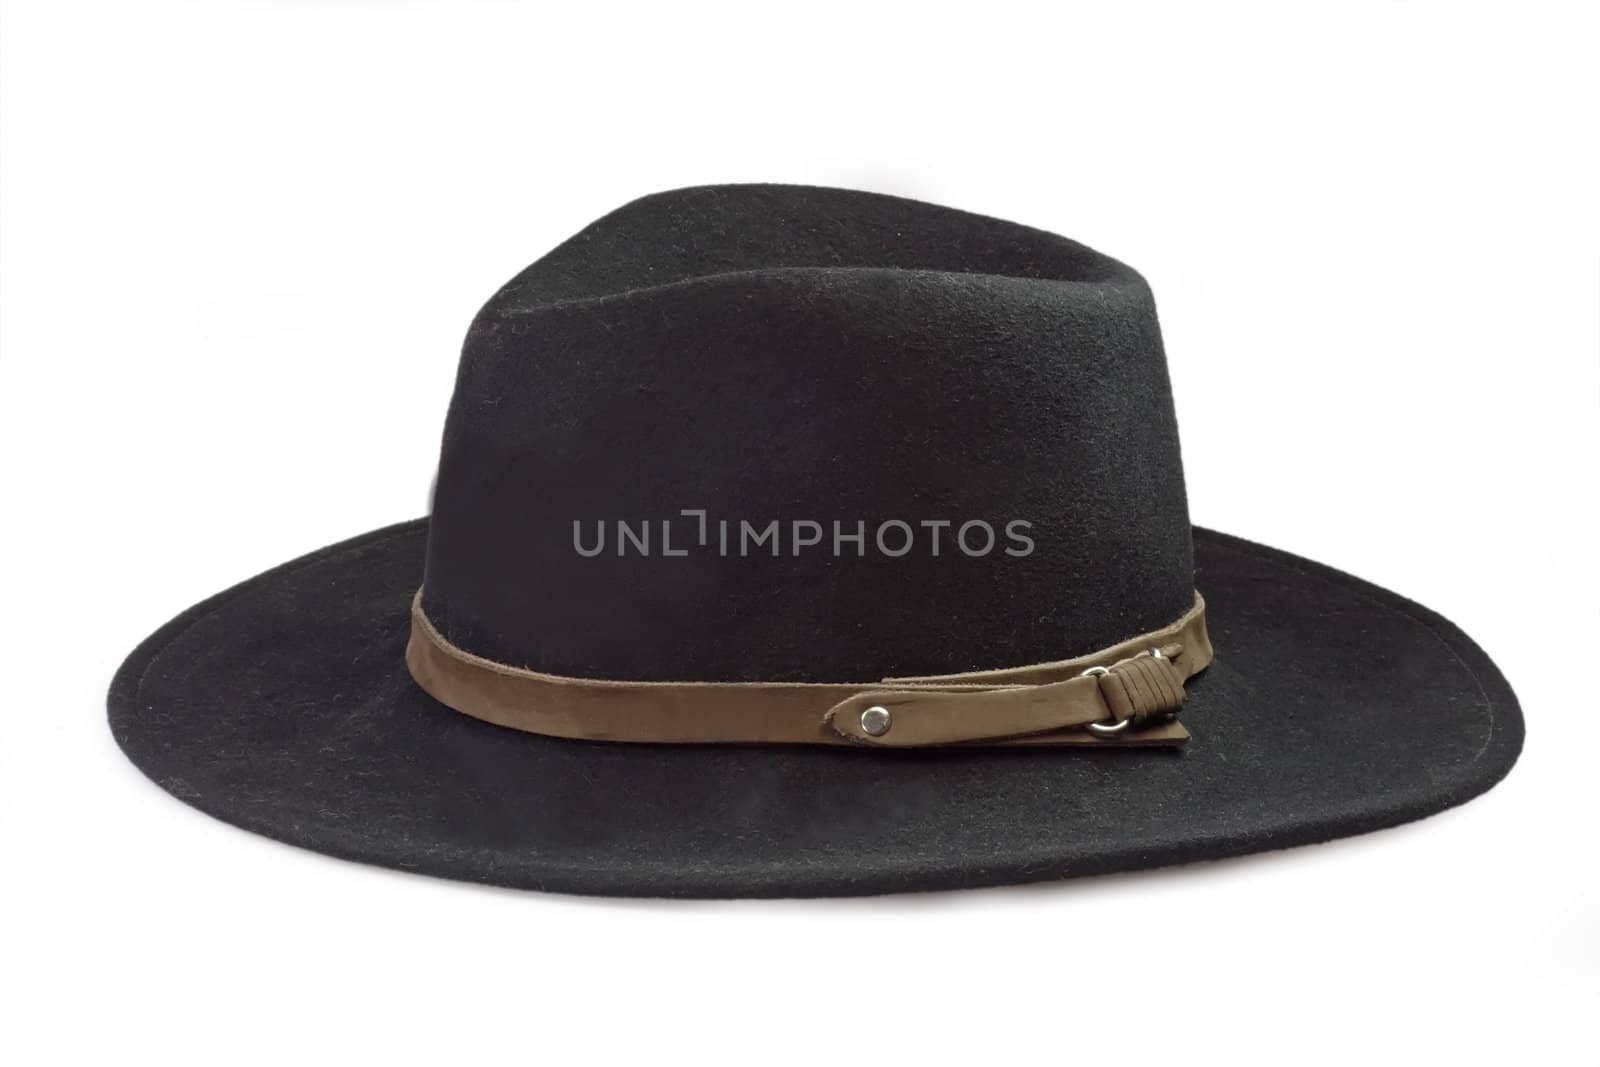 A black, men's hat on a white background.
